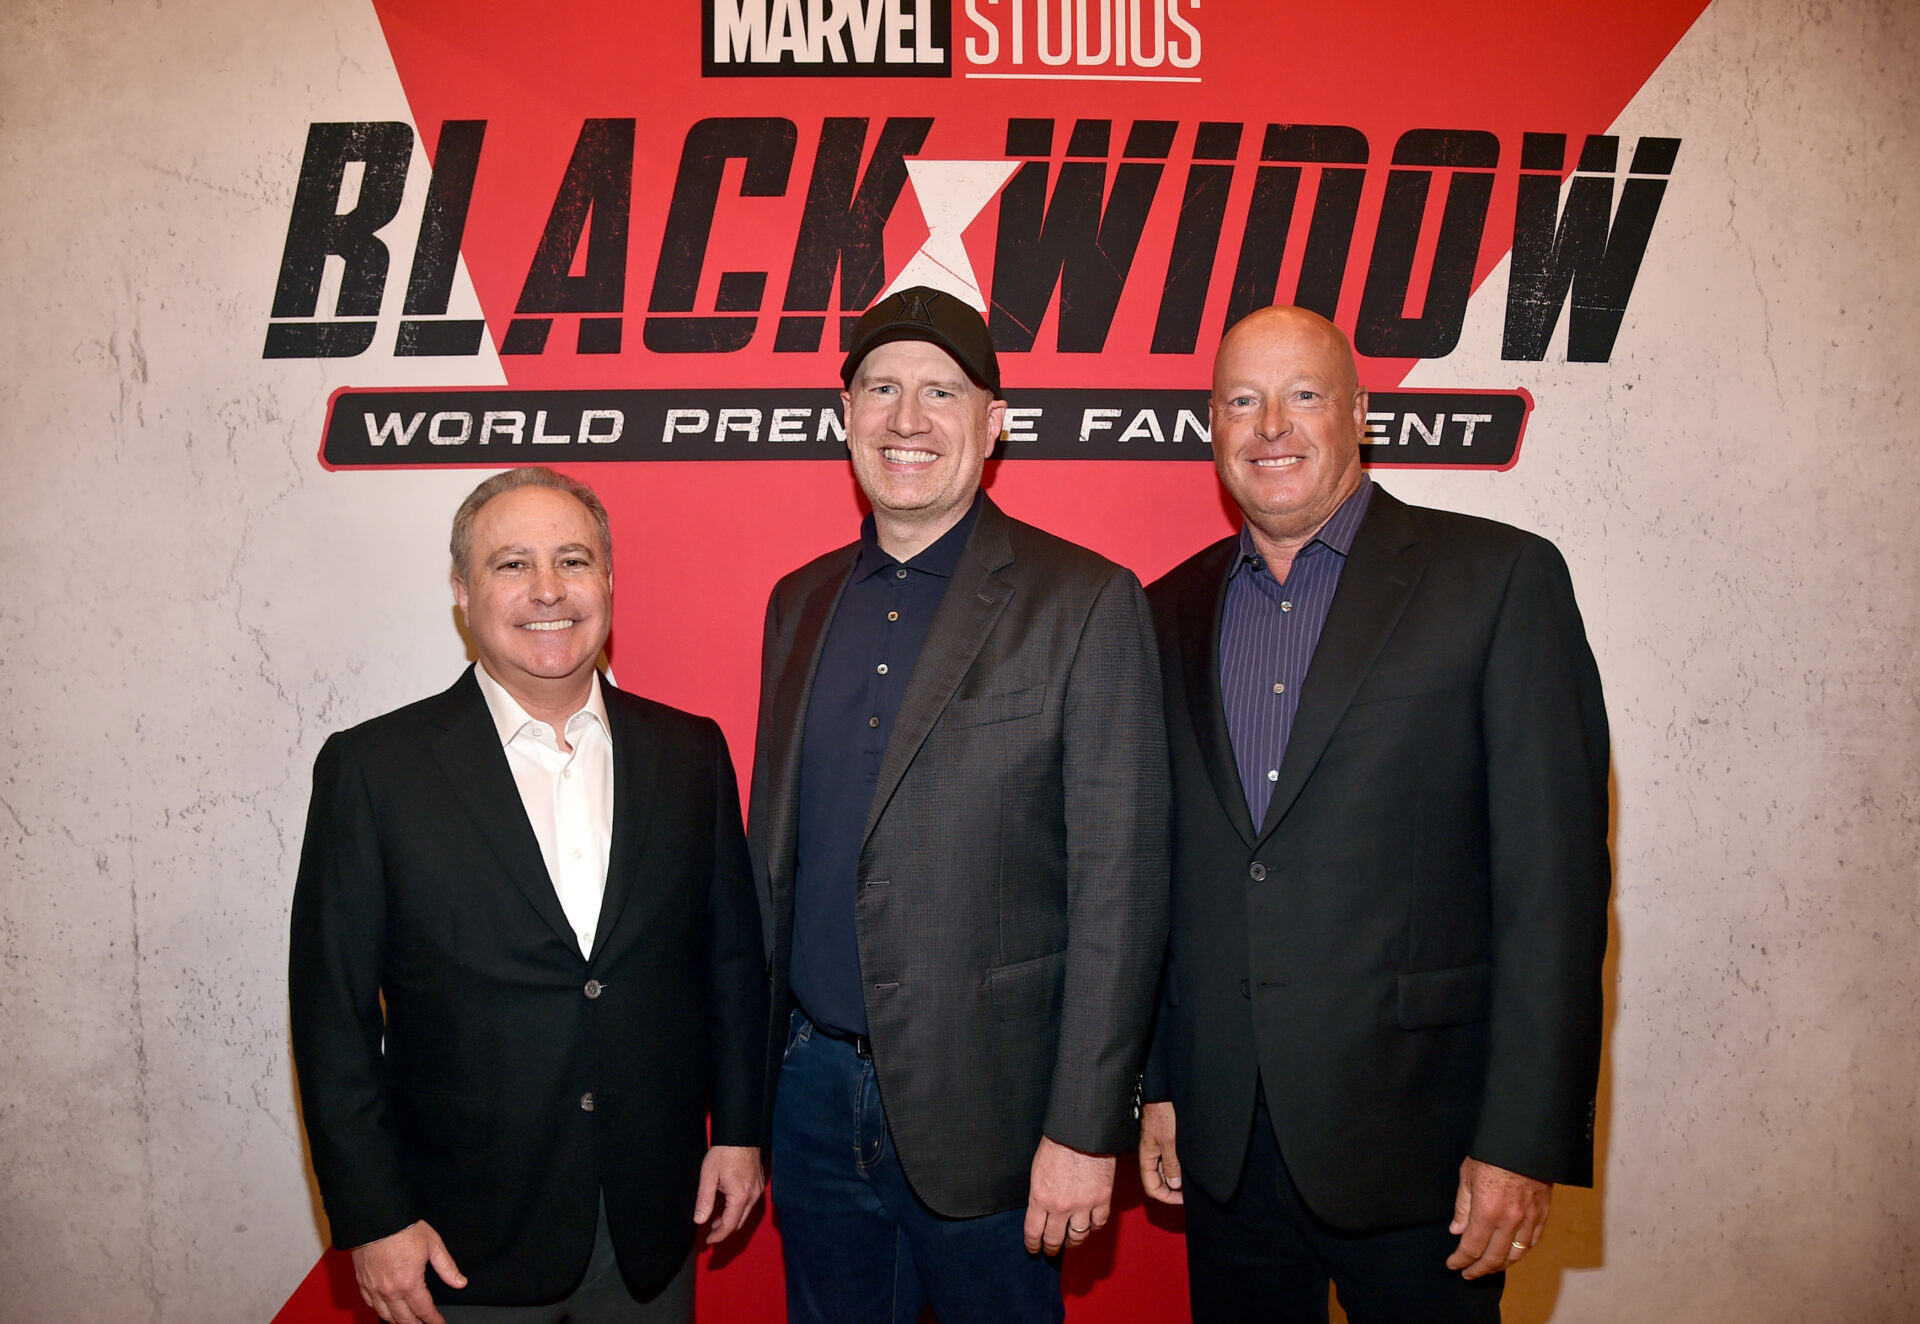 LOS ANGELES, CALIFORNIA - JUNE 29: (L-R) Chairman of Disney Studios Content Alan Bergman, Producer, President of Marvel Studios and Chief Creative Officer of Marvel Kevin Feige, and CEO of The Walt Disney Company Bob Chapek attend the Black Widow World Premiere Fan Event at Dolby Theatre on June 29, 2021 in Los Angeles, California. (Photo by Alberto E. Rodriguez/Getty Images for Disney)